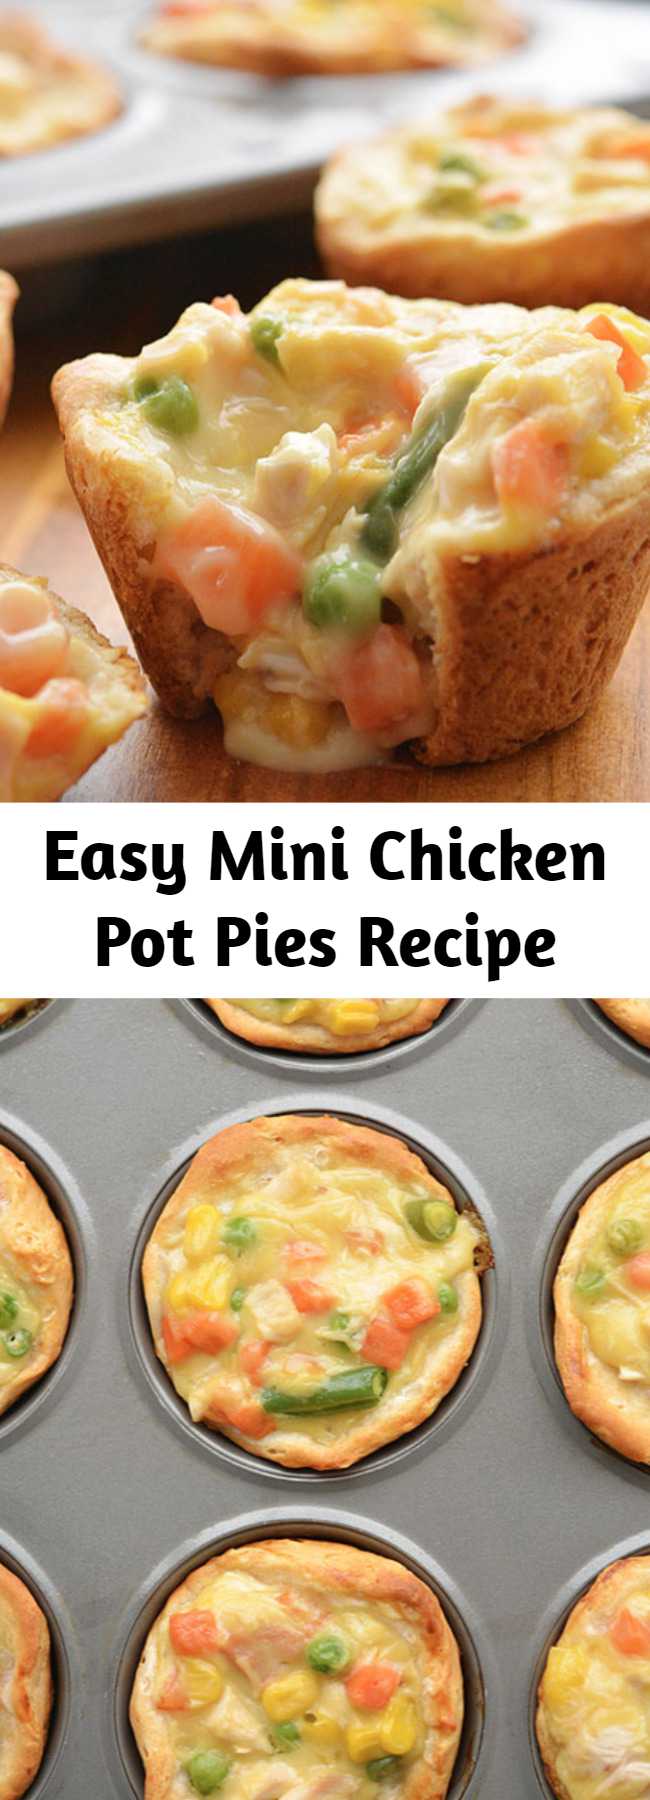 Easy Mini Chicken Pot Pies Recipe - These mini chicken pot pies are ridiculously easy. Seriously… they only have 4 ingredients! And you can make them from start to finish in about 30 minutes. Serve them with a little side salad and it makes a quick and simple weeknight dinner!